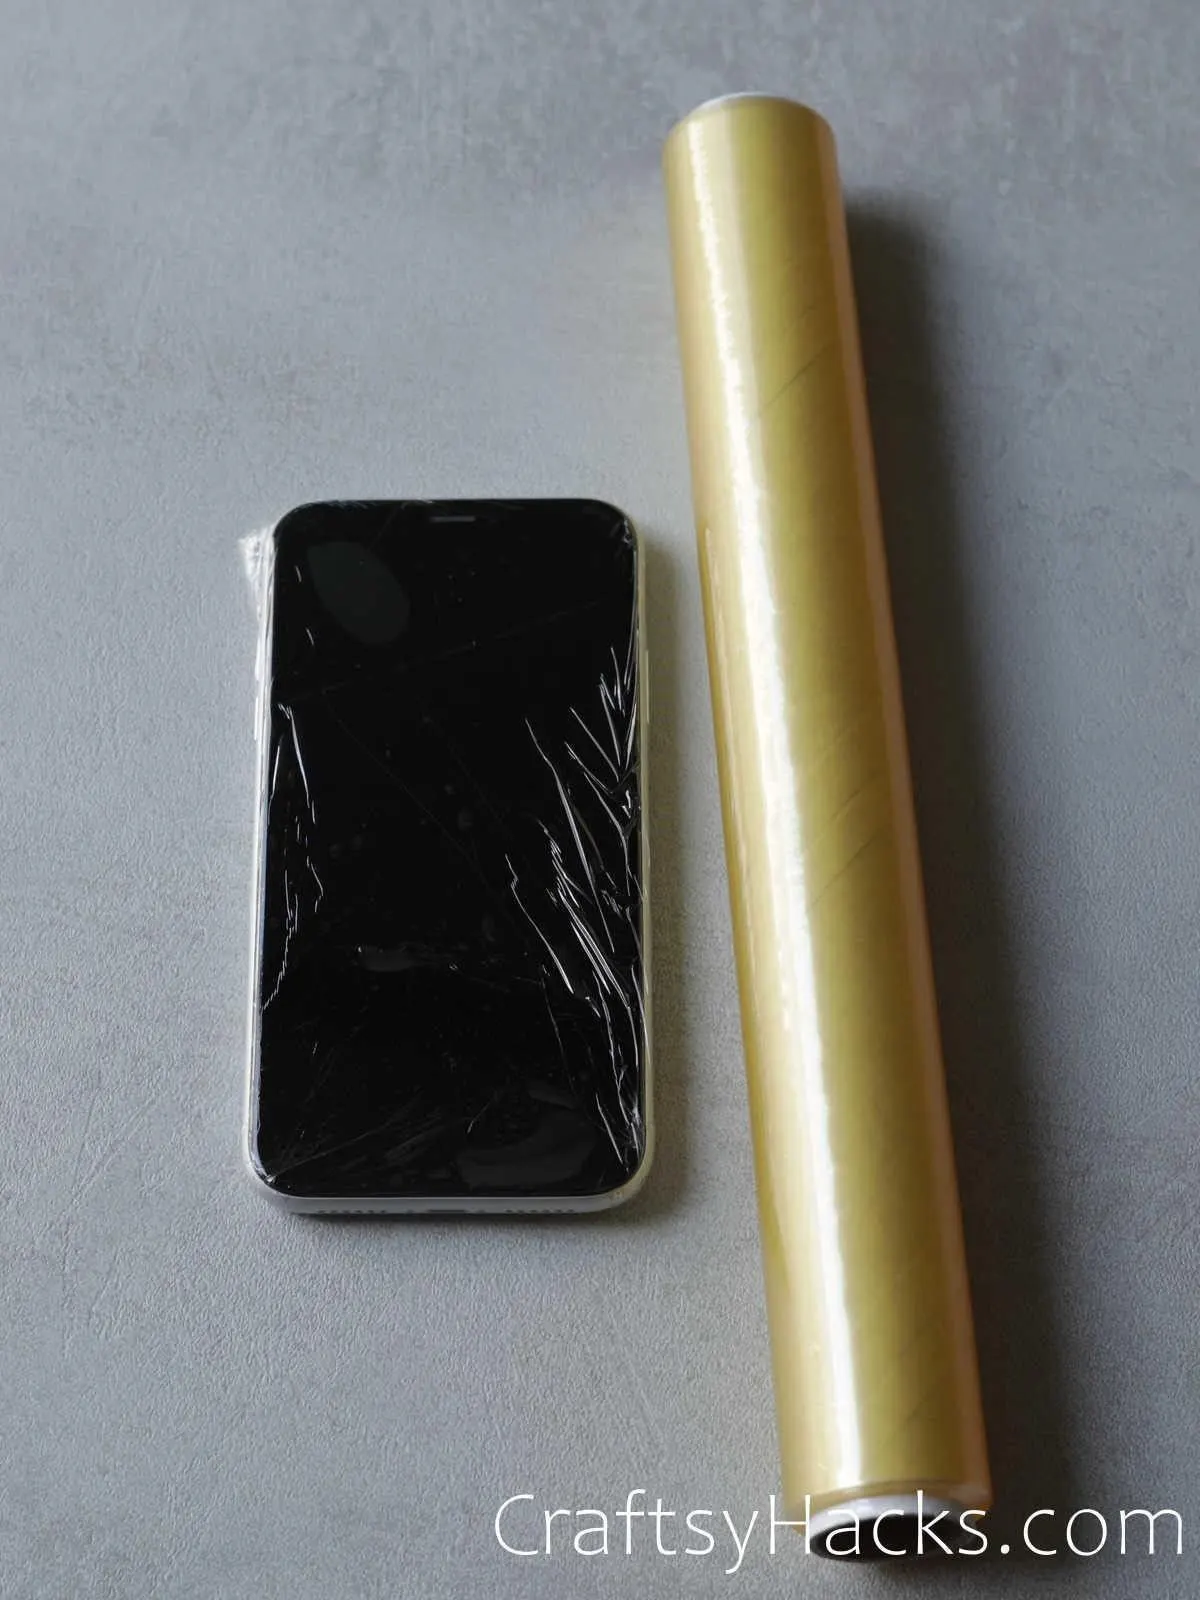 plastic wrap to cover cell phone when cooking